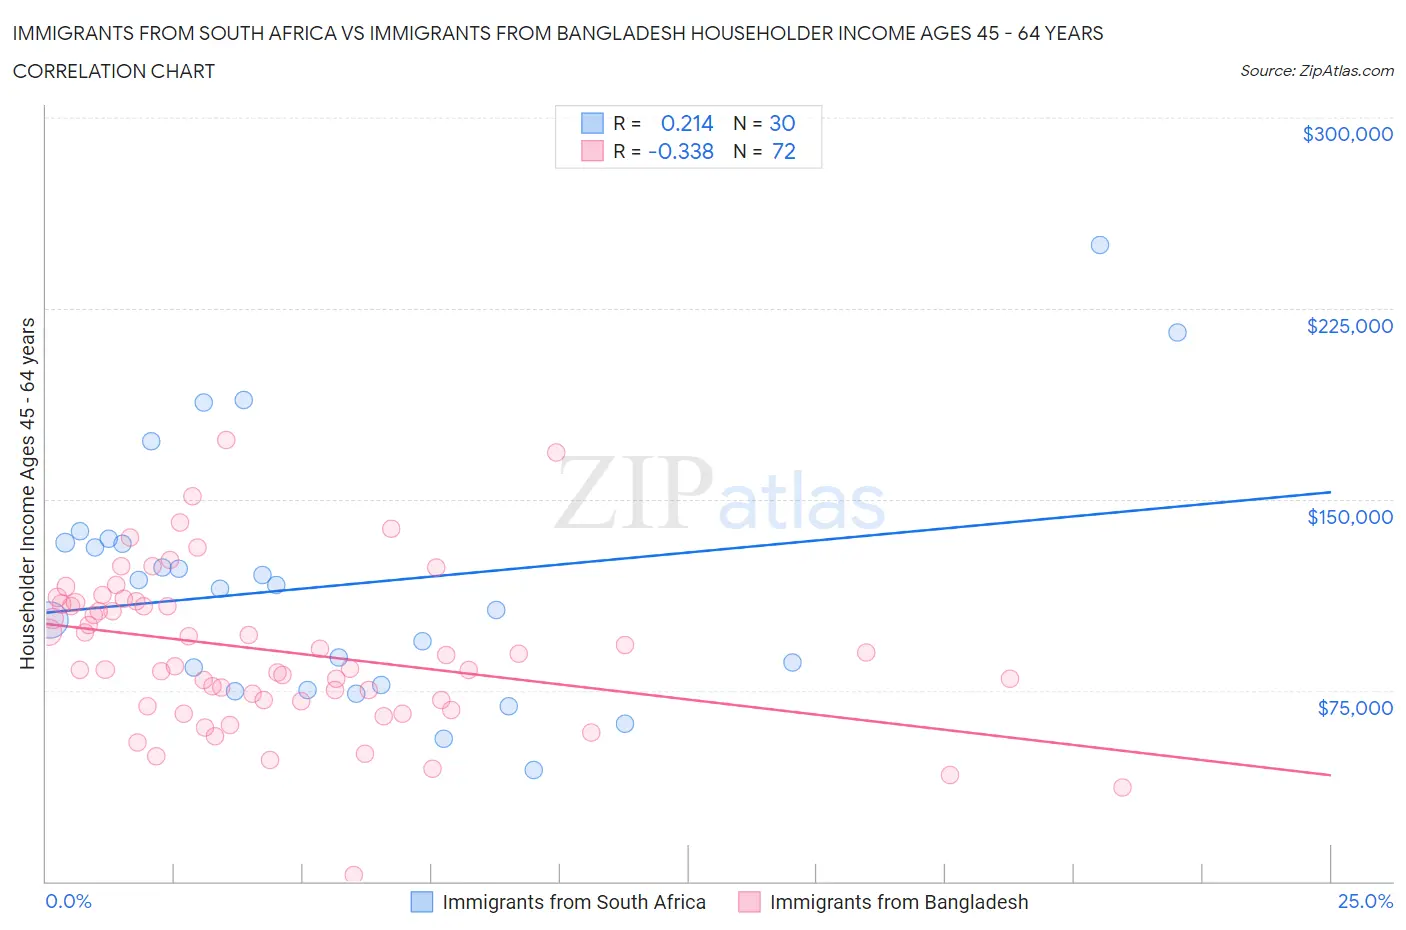 Immigrants from South Africa vs Immigrants from Bangladesh Householder Income Ages 45 - 64 years